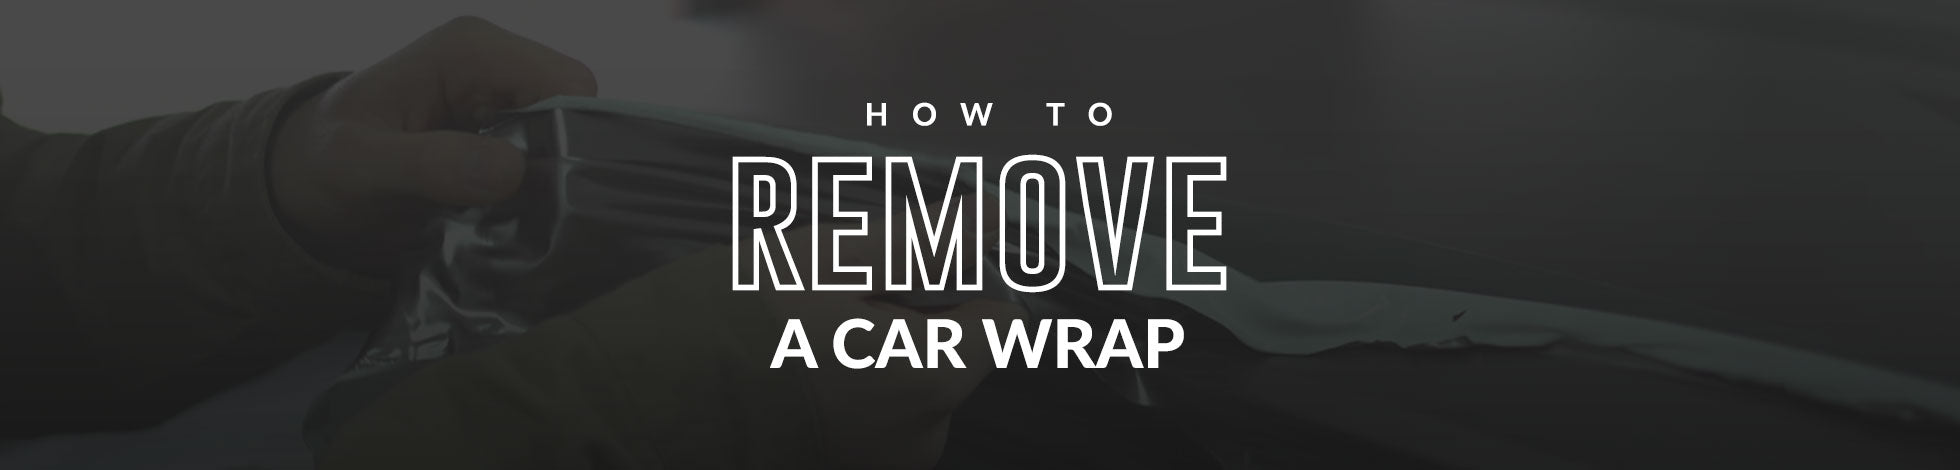 How To Remove A Car Wrap From Your Car